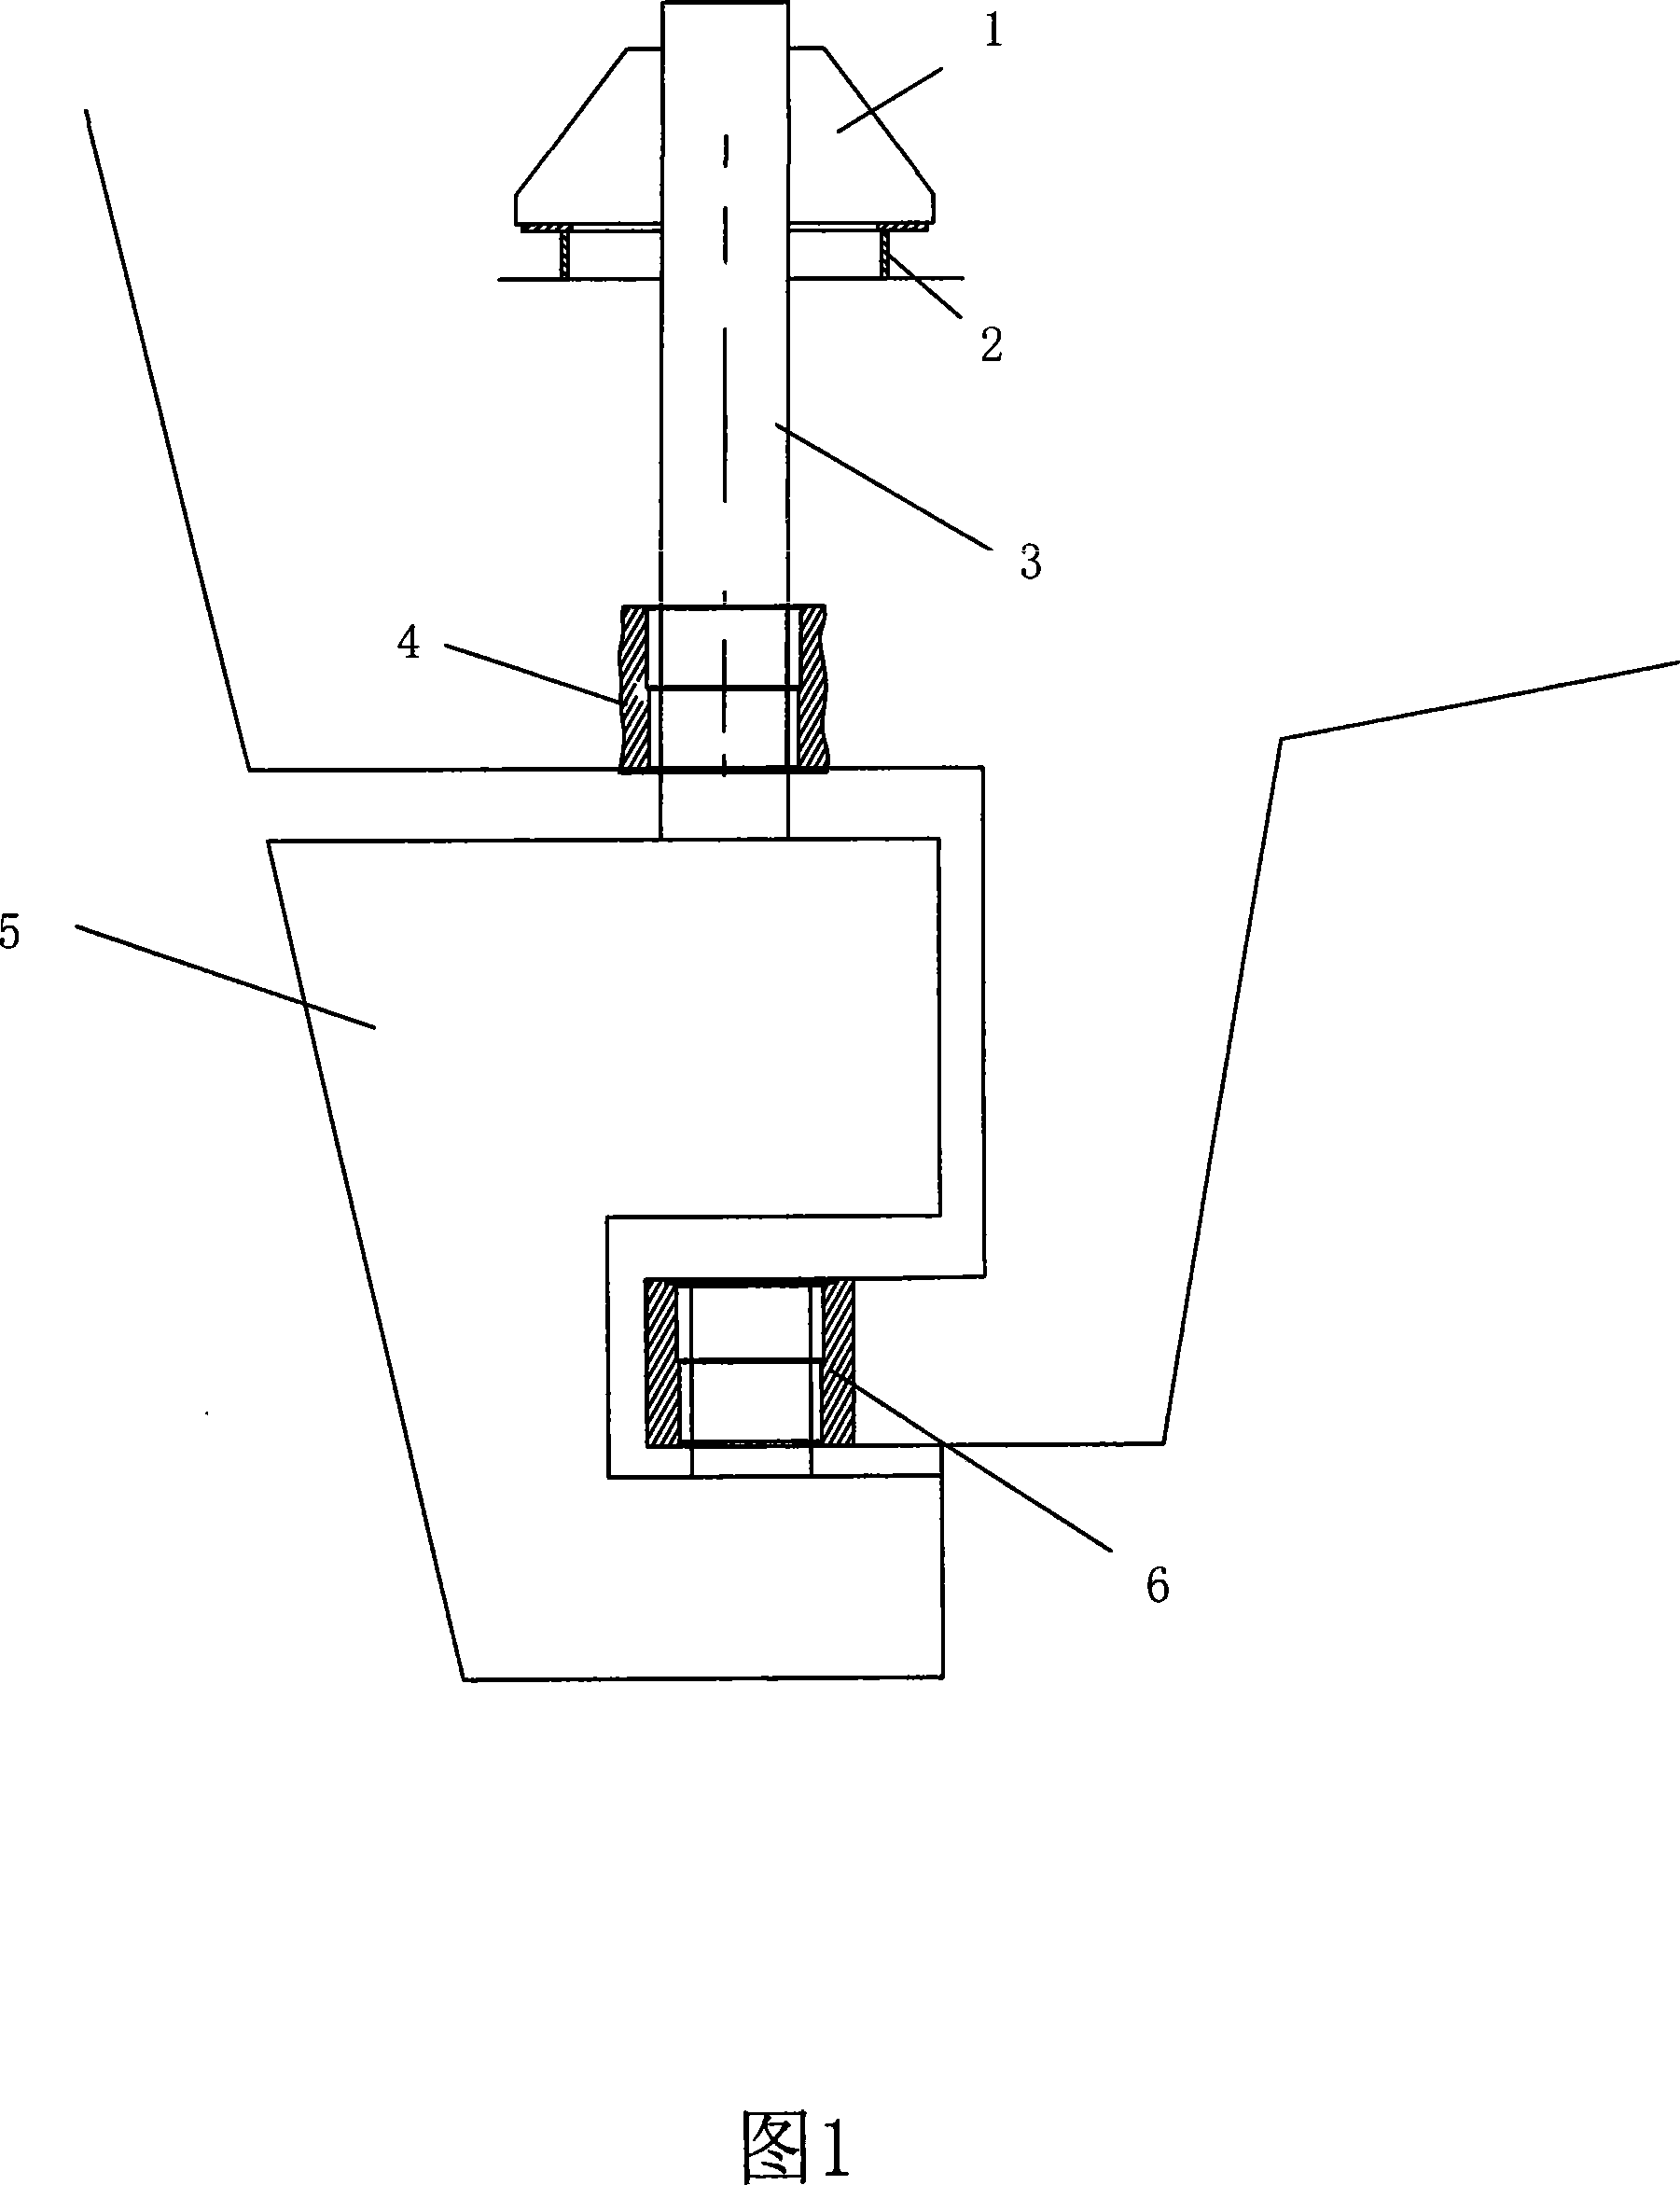 Locating mounting method for rudder carrier base on ship